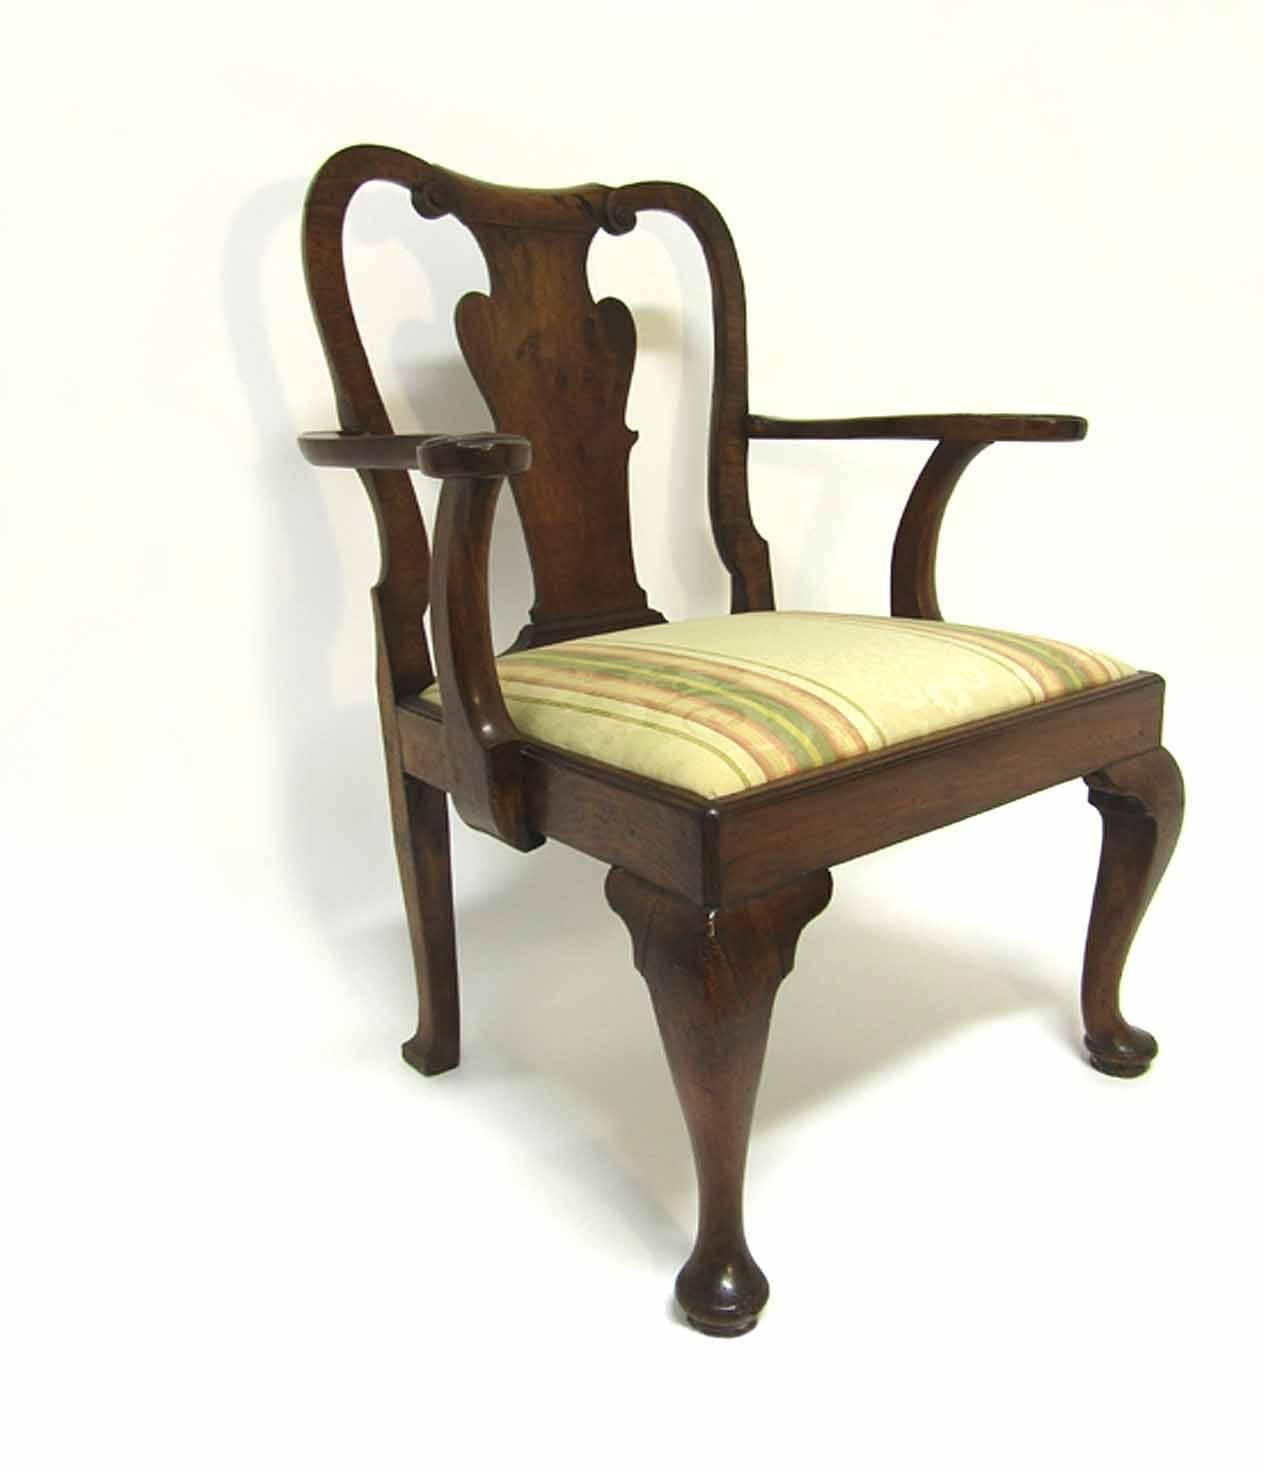 Fine antique George I period walnut armchair; rolled scroll crest rail flanked by C-scrolled, vasi-form back splat, flanked by carved side arms with shell and foliate hand grips slip seat and raised on cabriole legs ending in skippered pad feet.